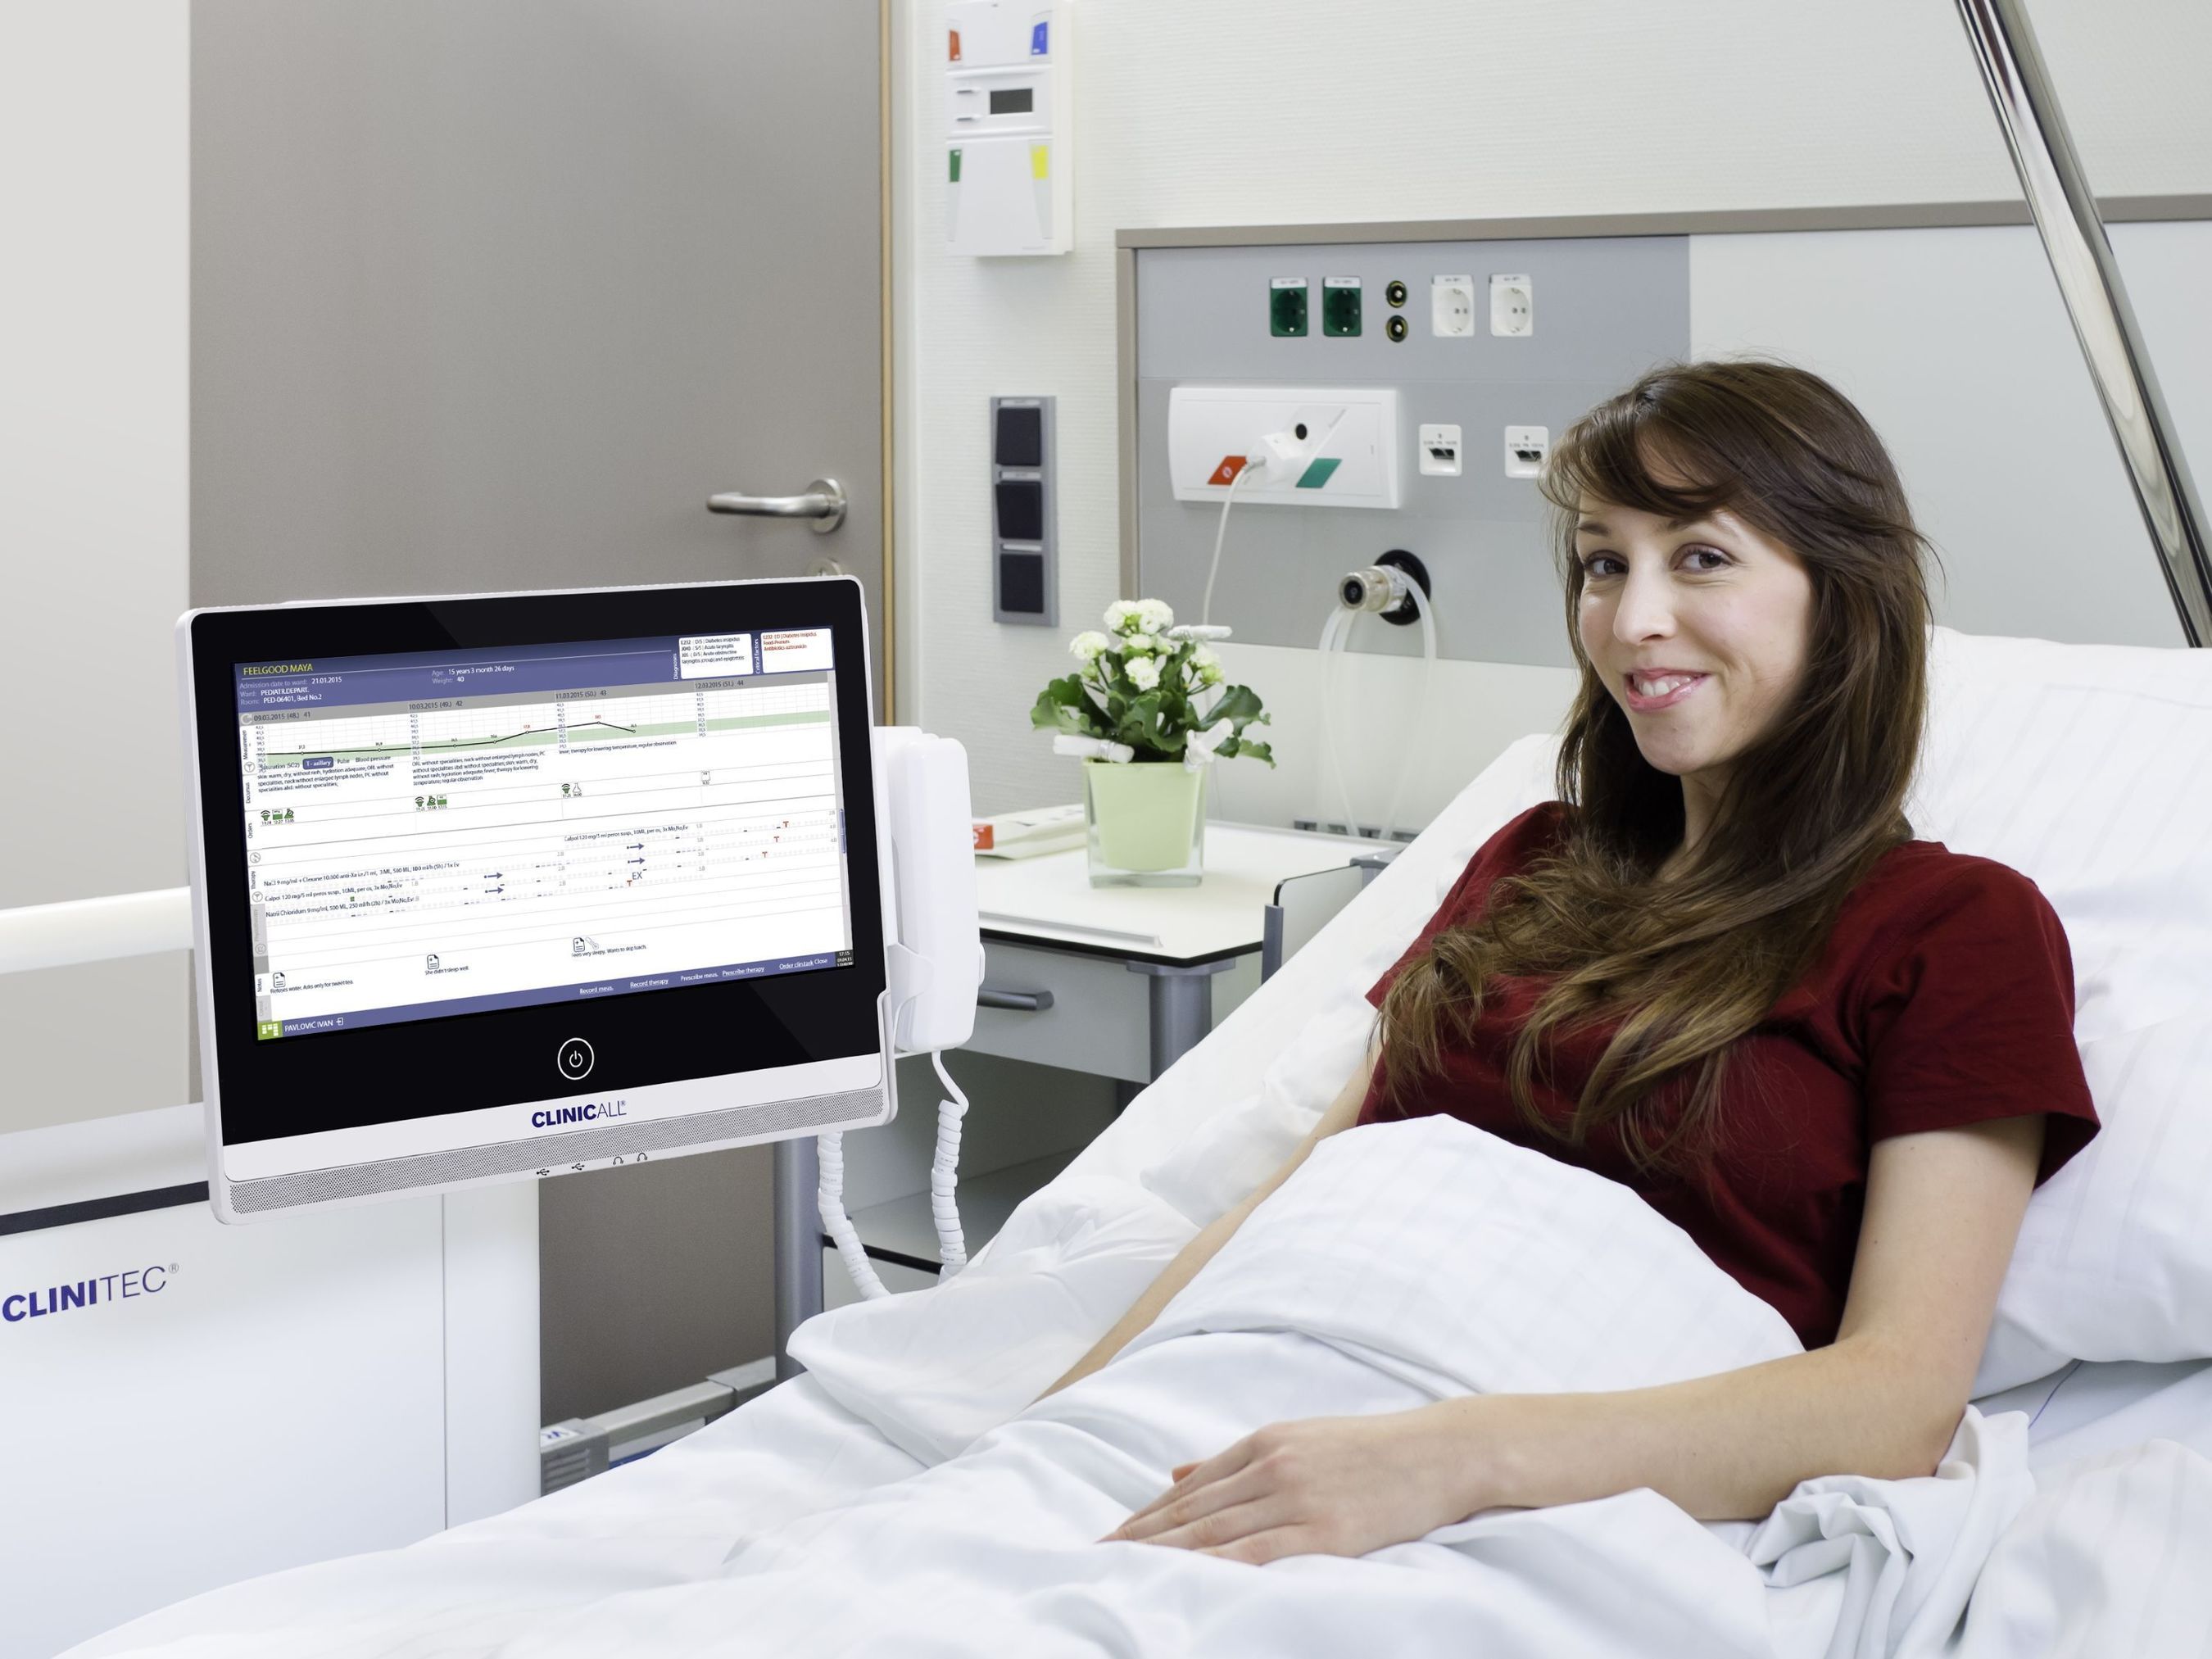 ClinicAll and SRC Infonet are setting new standards : E-health meets infotainment - the birth of a modern and one-of-a-kind European clinic (PRNewsFoto/ClinicAll)